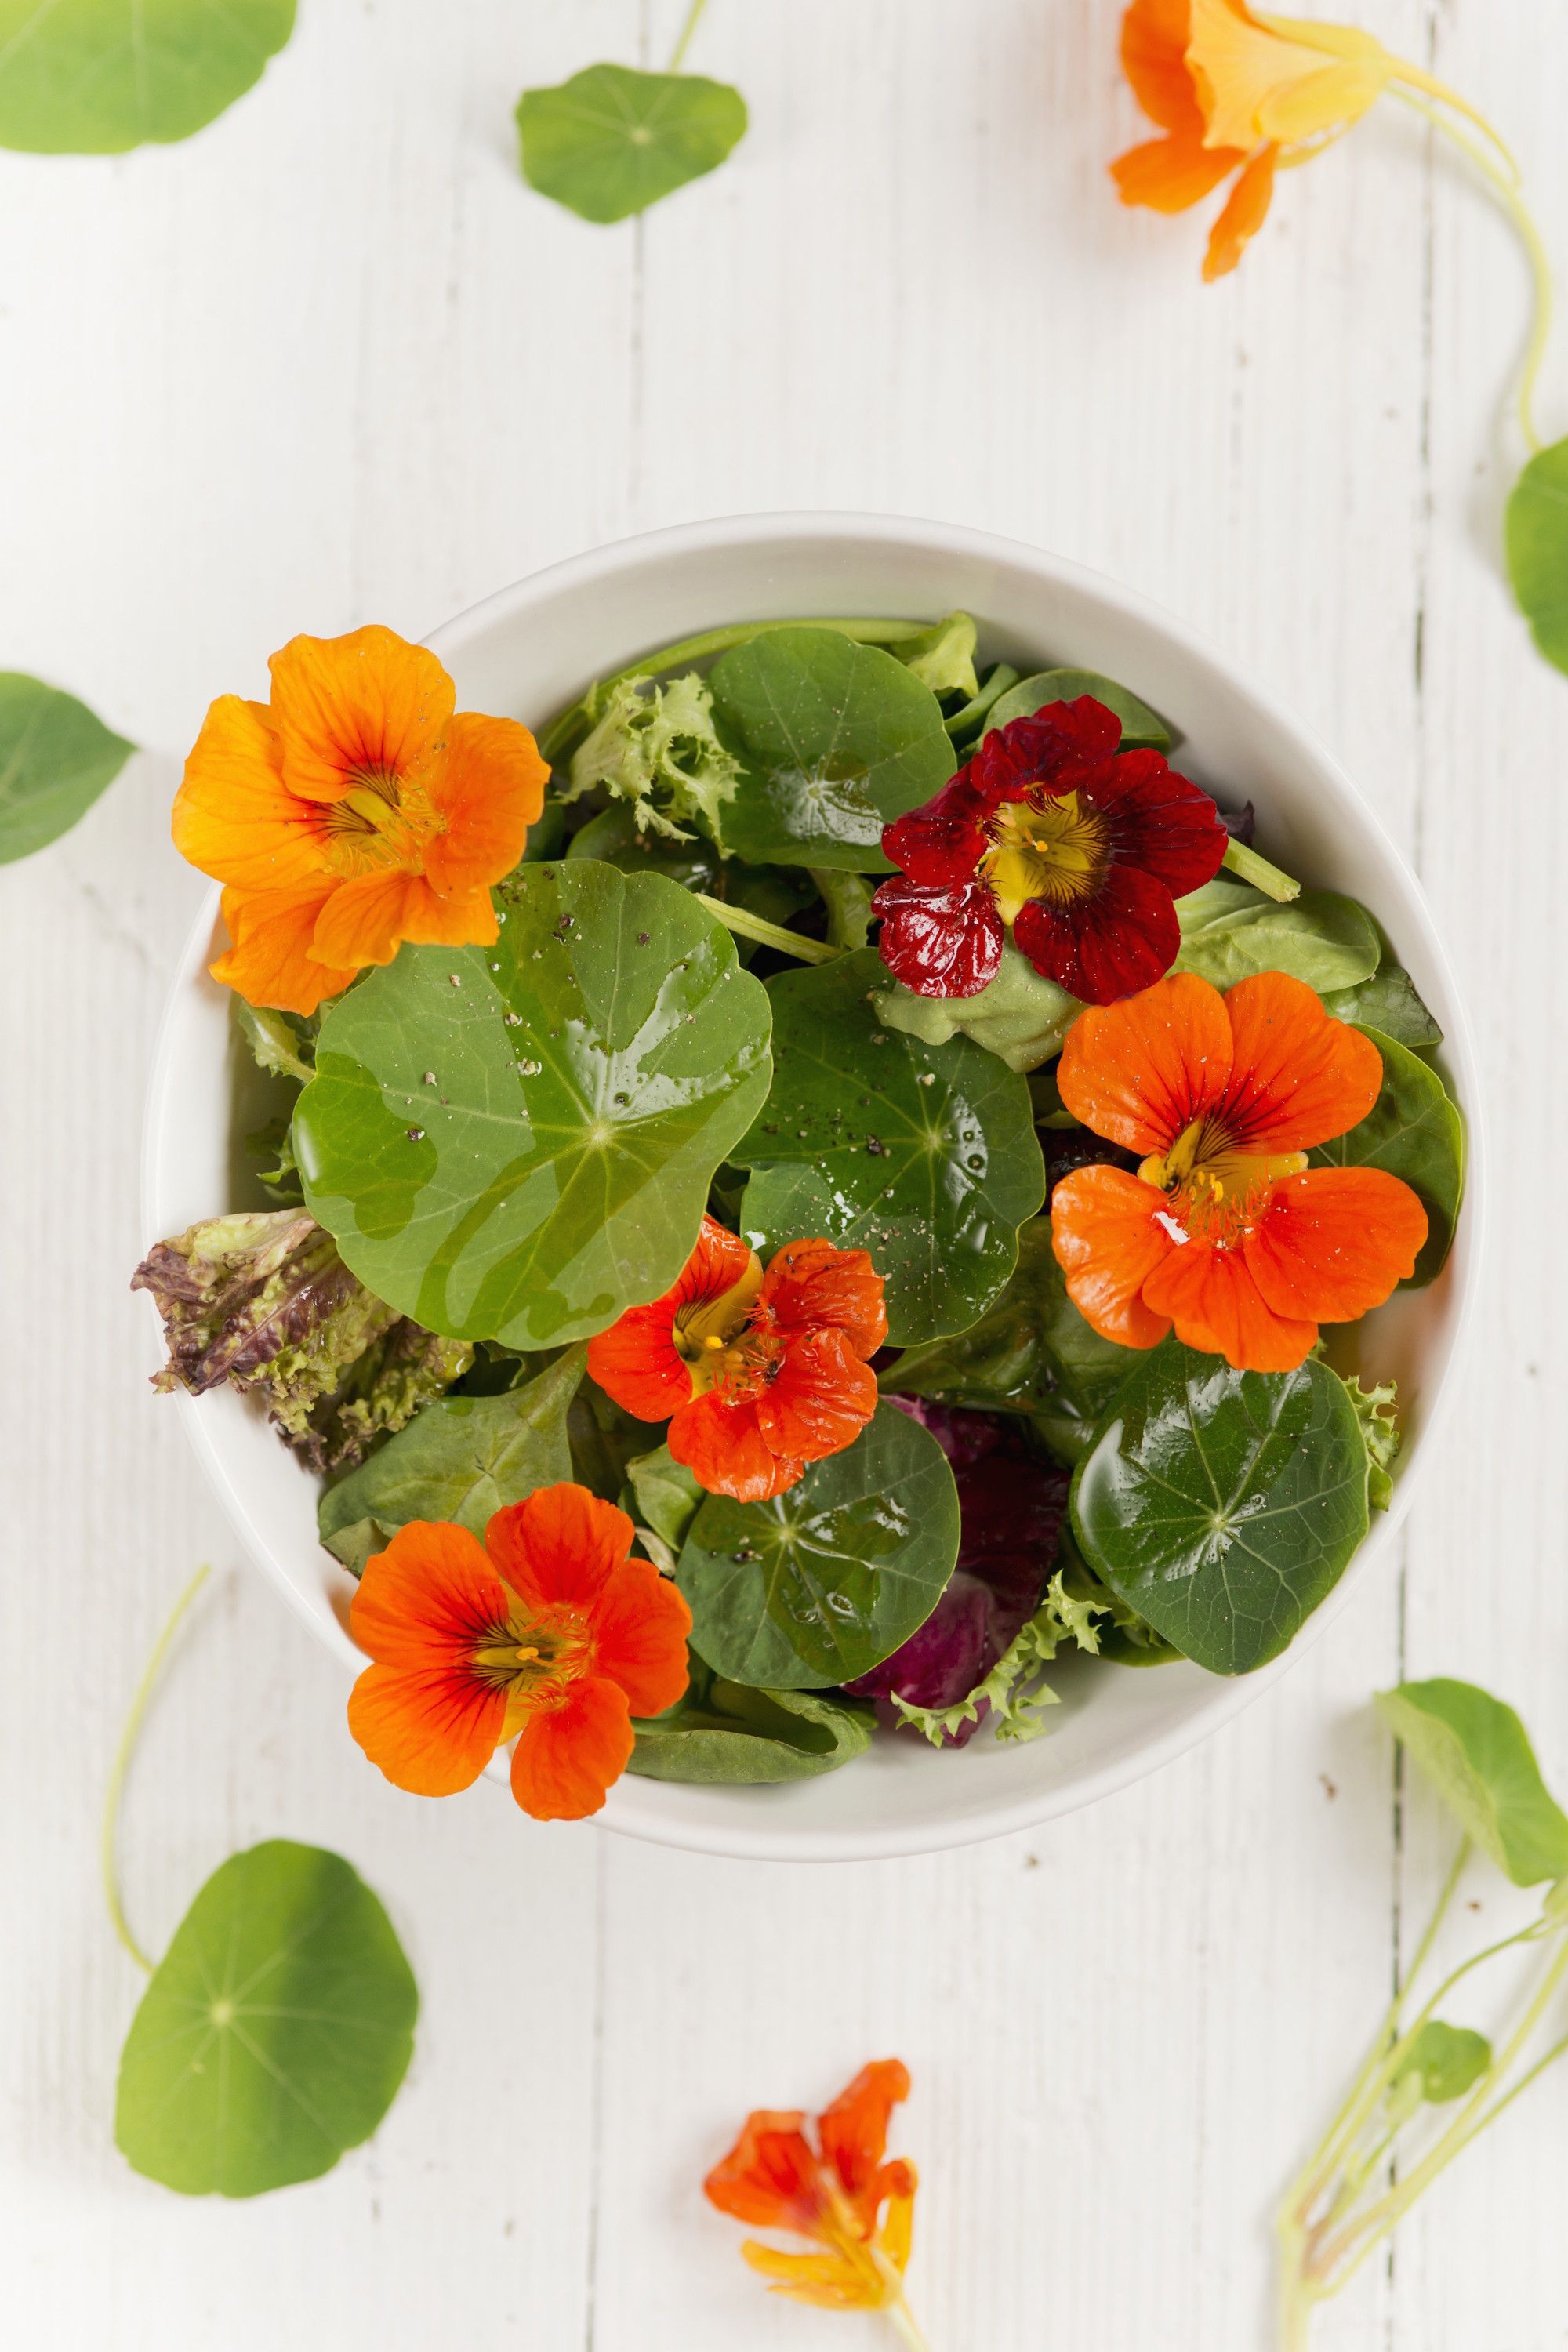 Types of Edible Flowers and How to Use Them - Latest Help & Advice